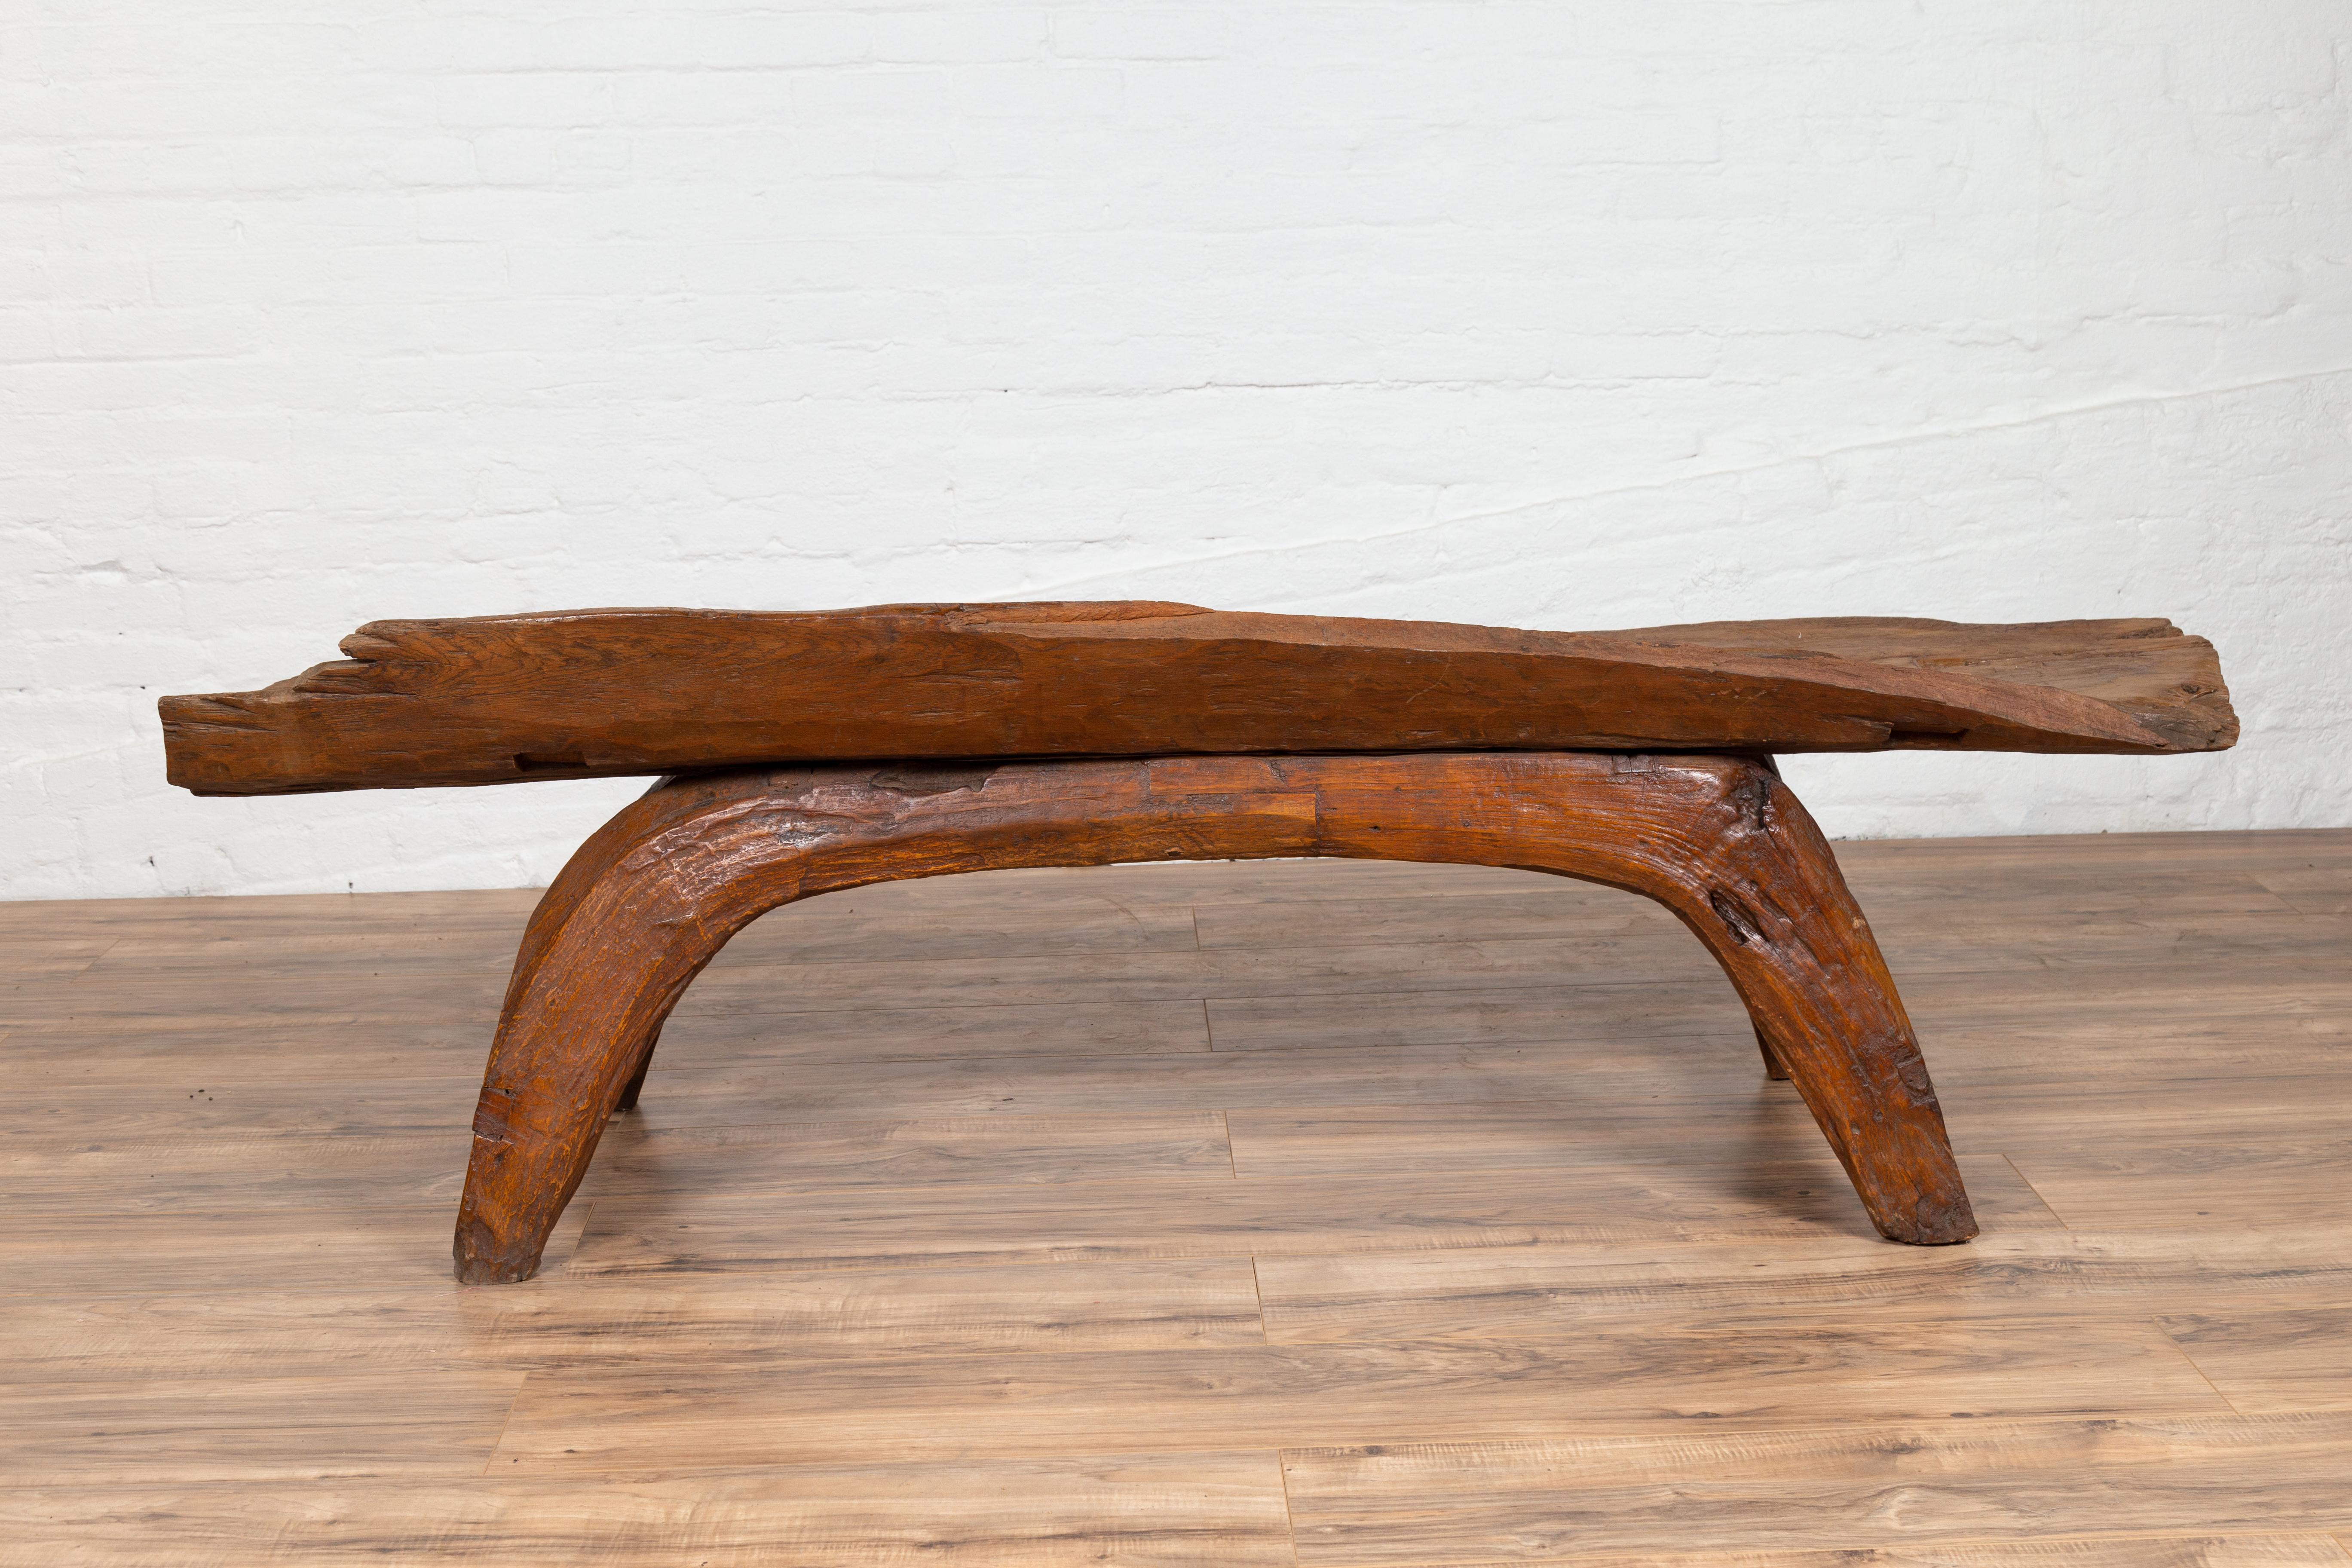 Freeform Design Antique Wooden Bench from the Riverbed of Bali with Arching Base 6